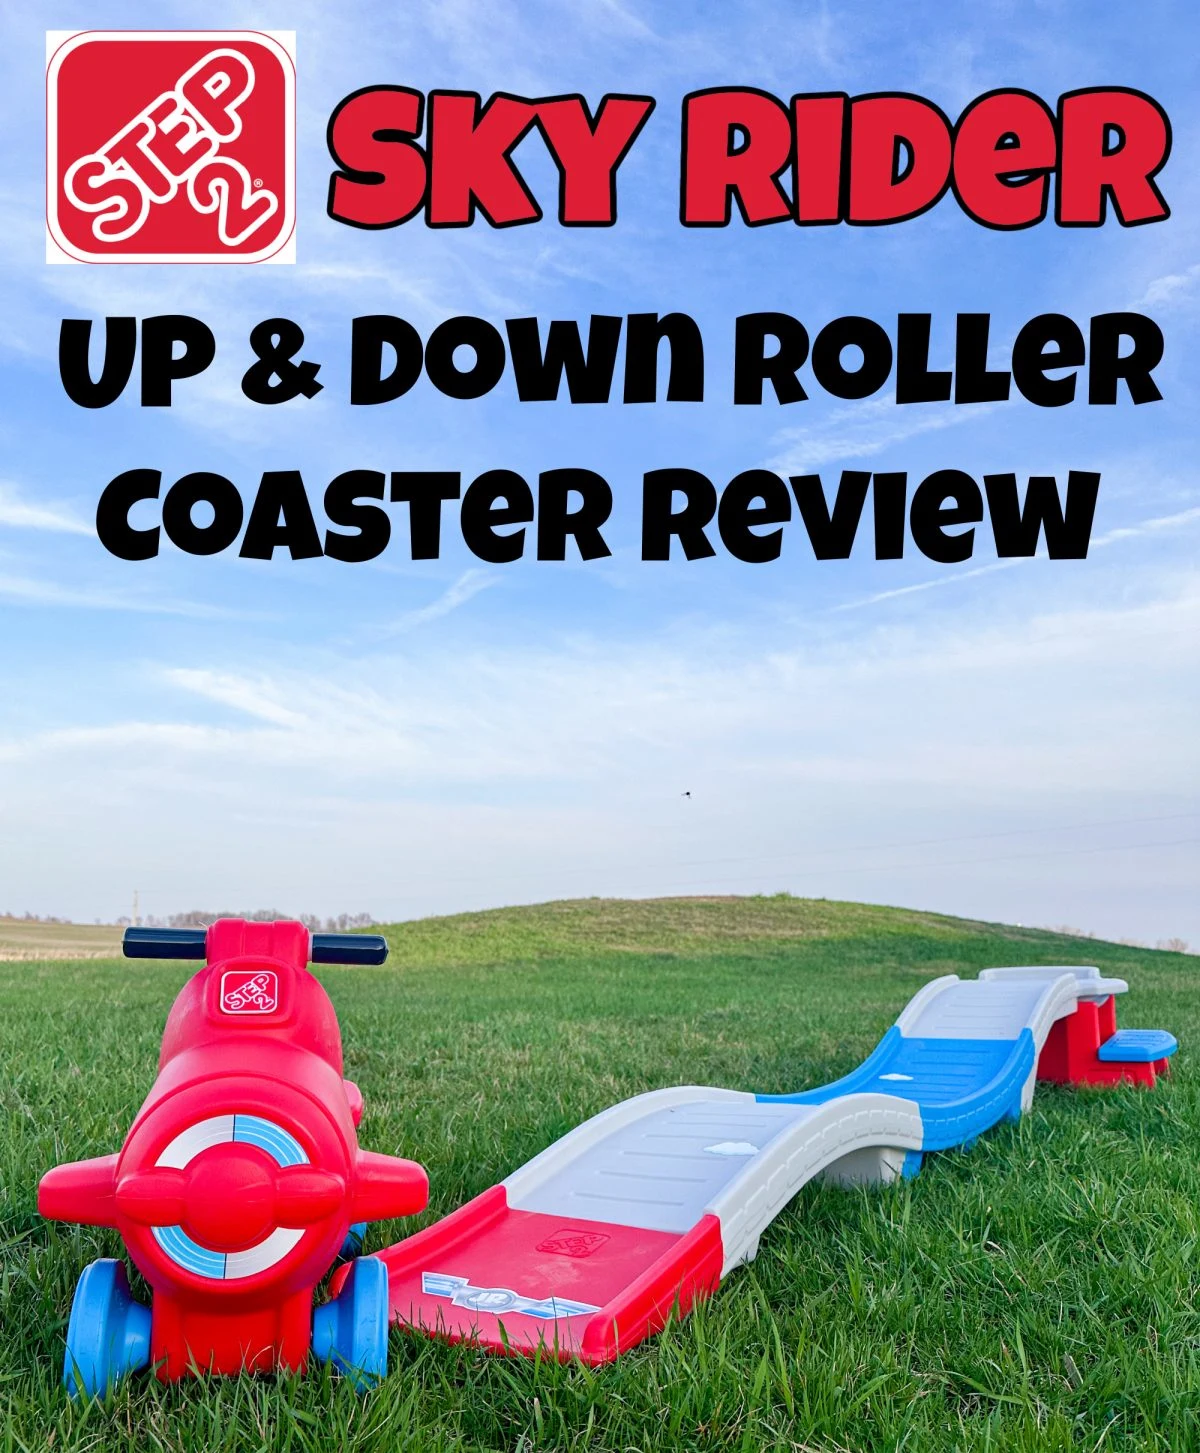 Step2 Sky Rider Up & Down Roller Coaster Review.